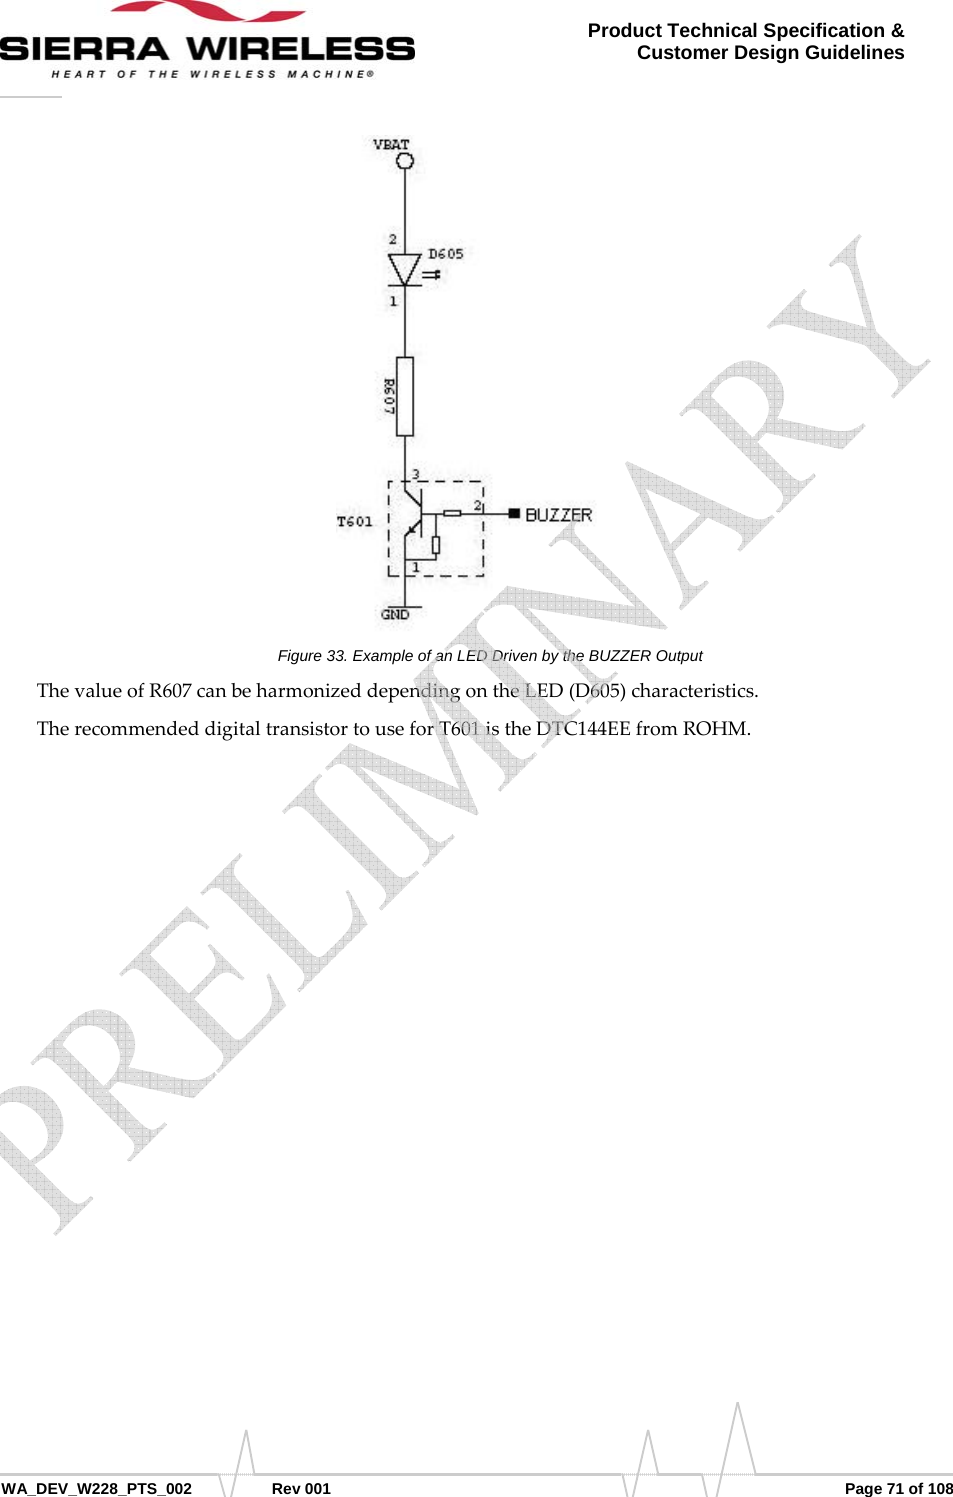      WA_DEV_W228_PTS_002 Rev 001  Page 71 of 108 Product Technical Specification &amp; Customer Design Guidelines Figure 33. Example of an LED Driven by the BUZZER Output ThevalueofR607canbeharmonizeddependingontheLED(D605)characteristics.TherecommendeddigitaltransistortouseforT601istheDTC144EEfromROHM.   